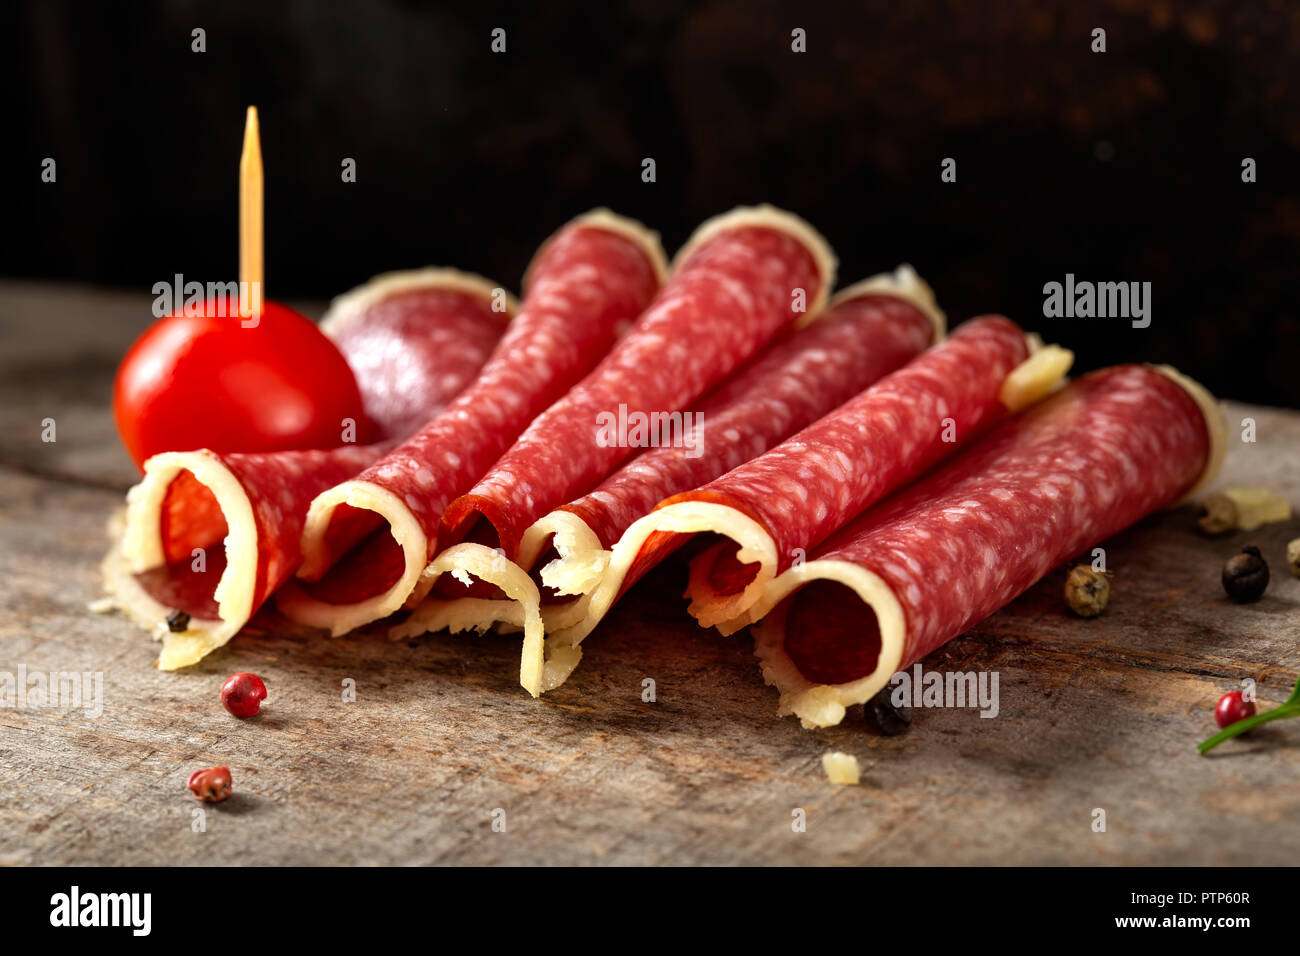 Slices of salami surrounded by parmesan cheese with peppercorns and cherry tomato Stock Photo